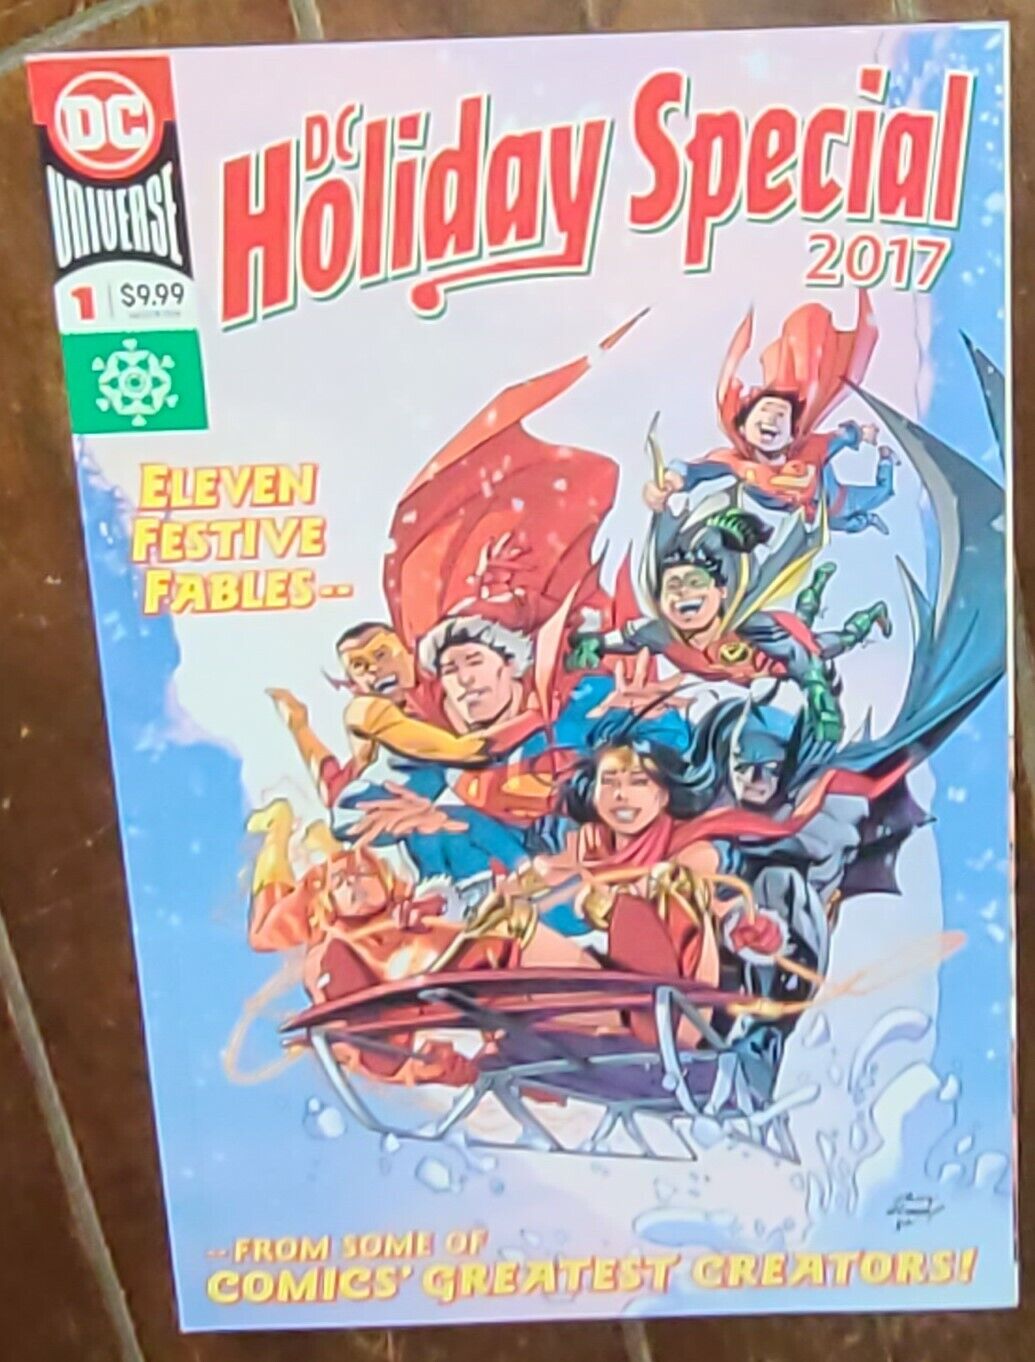 2017 DC Holiday Special #1, (2017, DC): Eleven Festive Fables